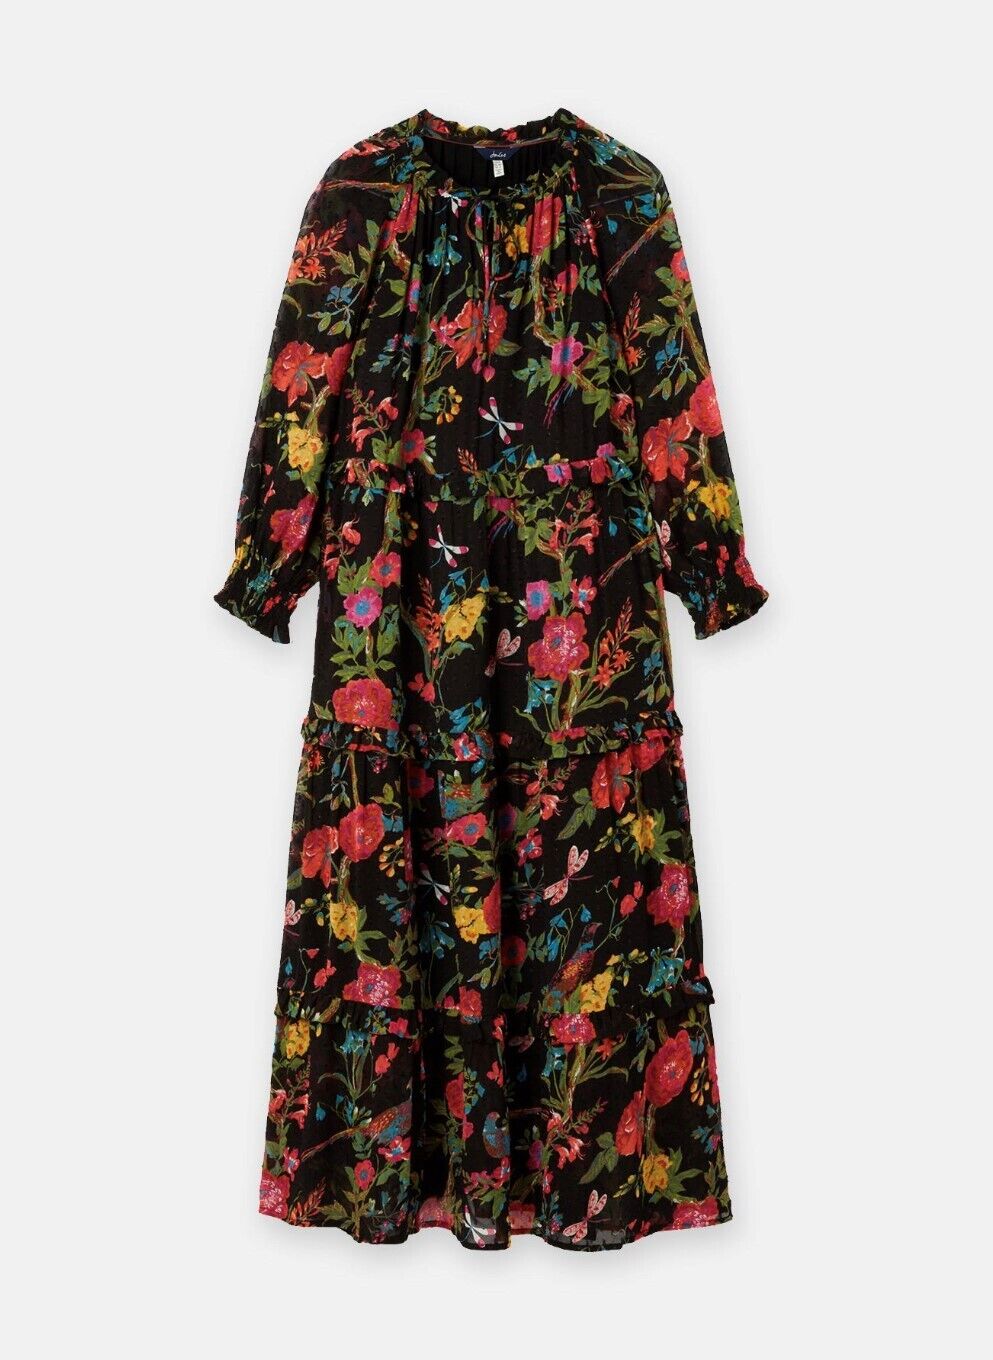 EX Joules  Brooke Tiered Long Sleeve Frill Dress Black Floral Sizes 6-16 RRP £90